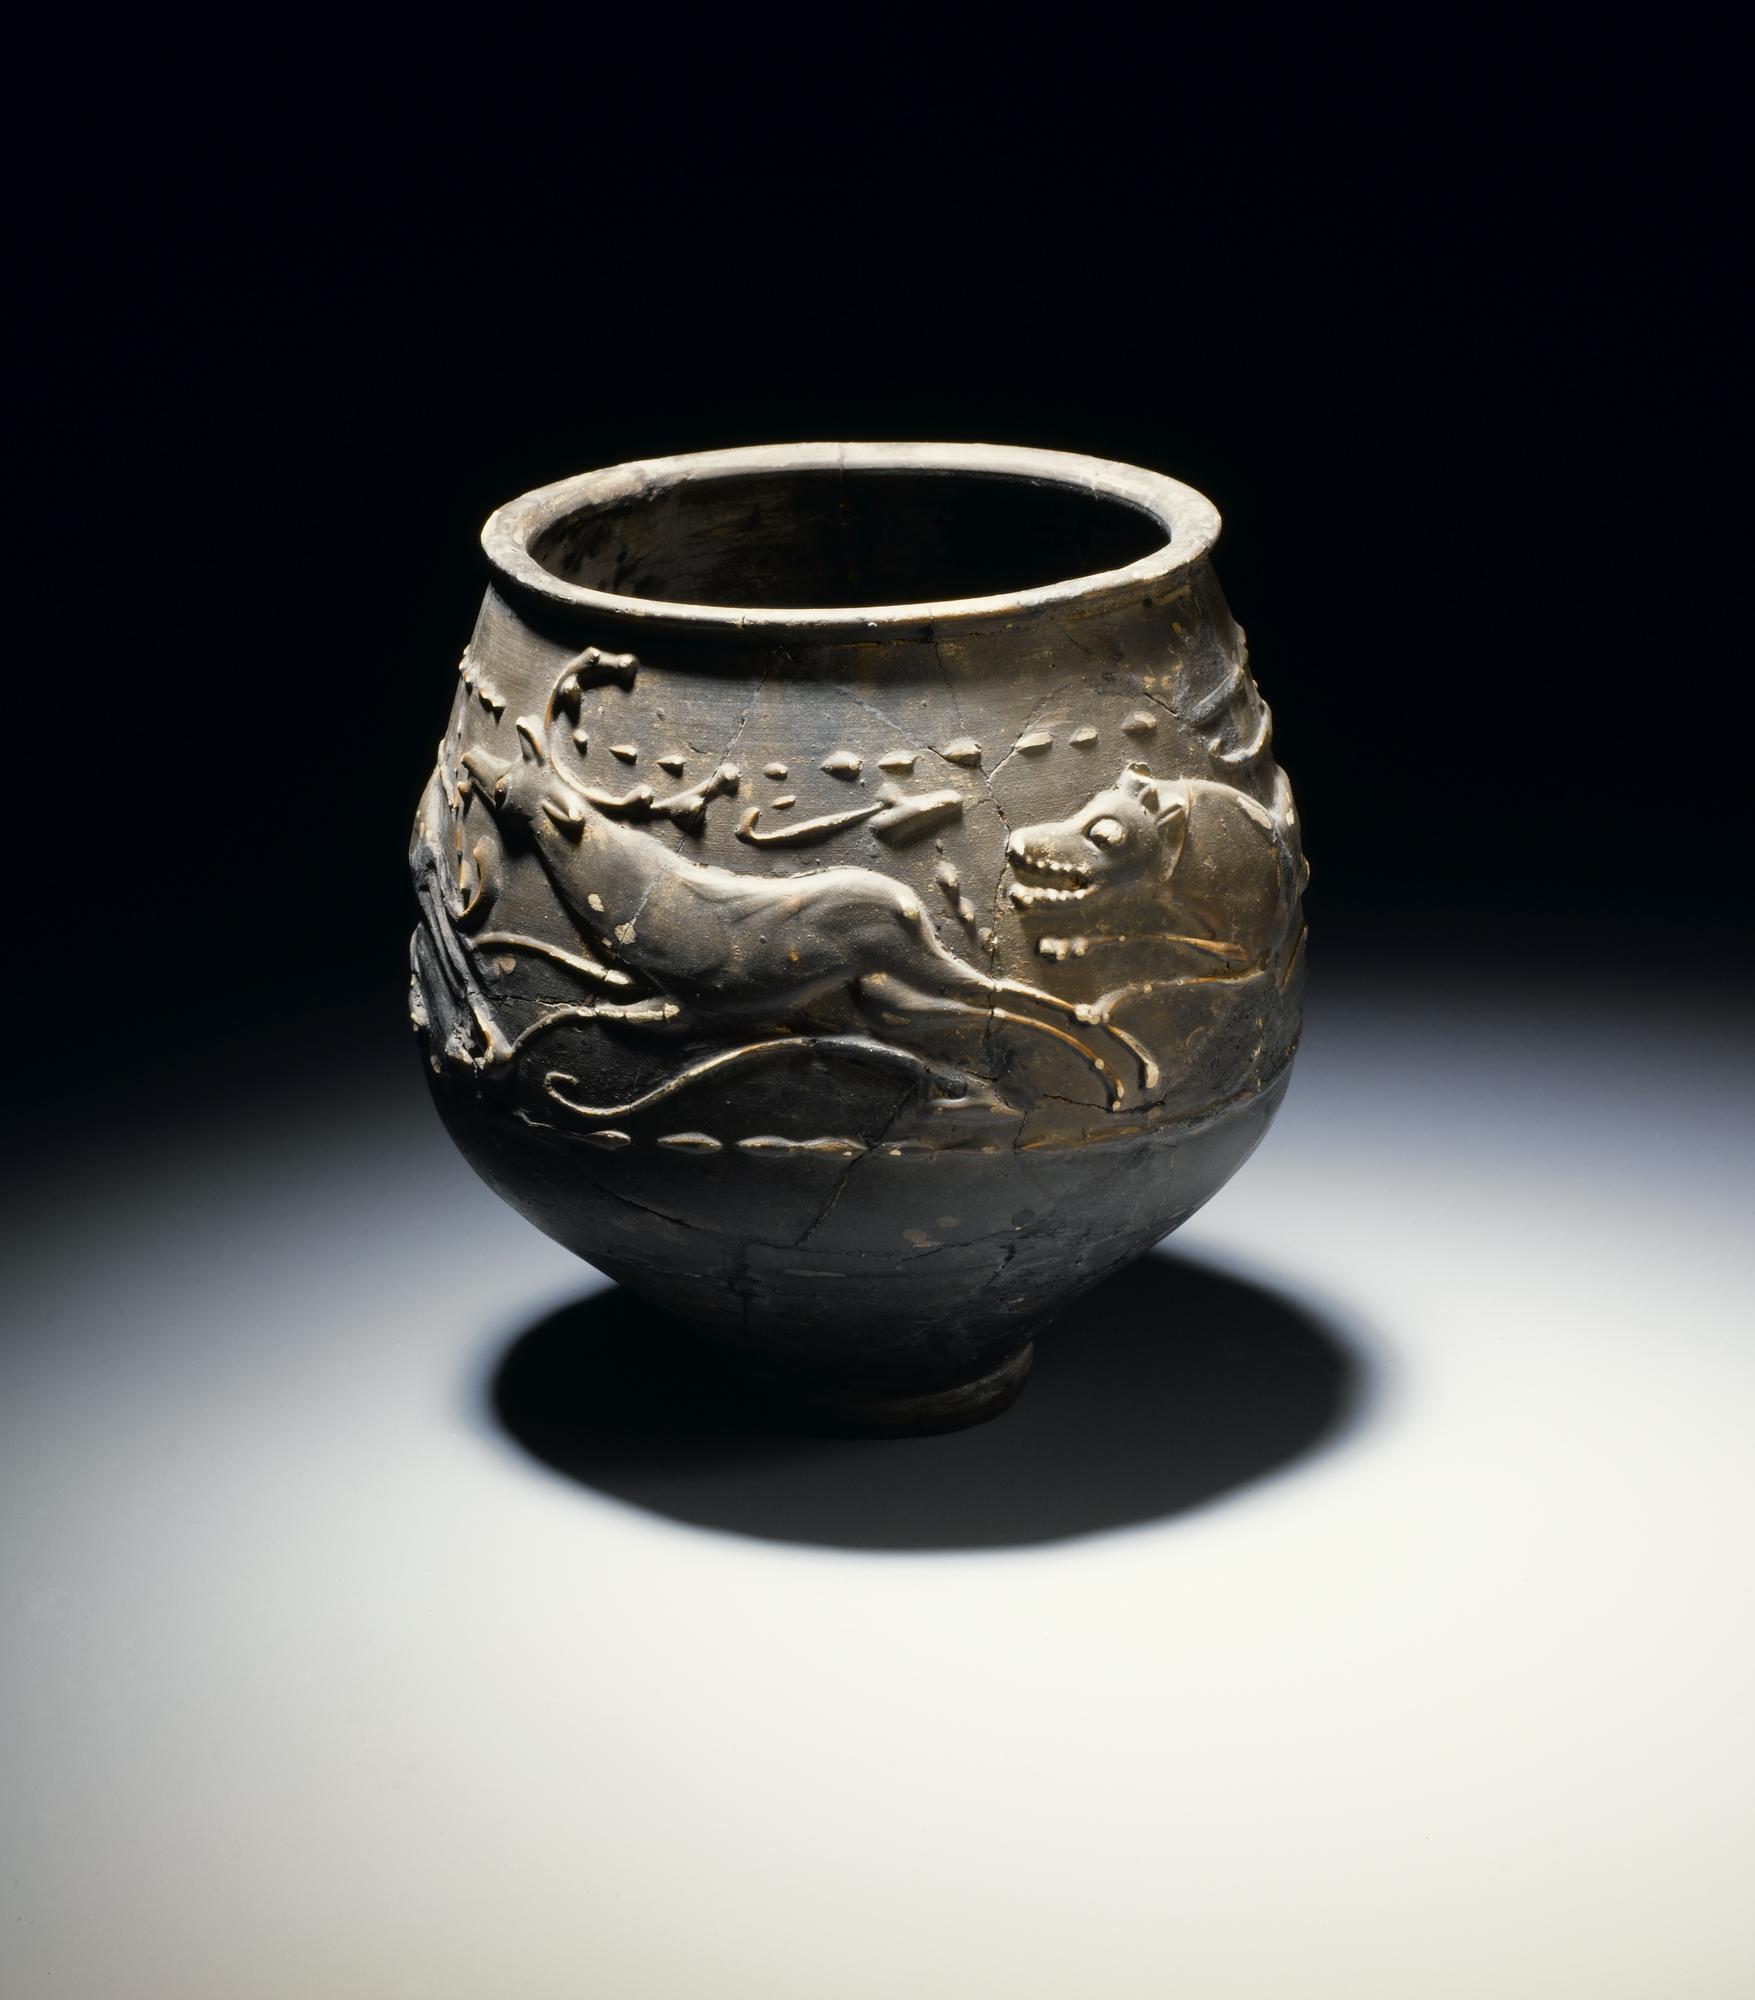 Image of Castor ware beaker decorated with a chase scene showing stag, hind and hounds, from the Roman site at Newstead, 140 - 180 AD © National Museums Scotland